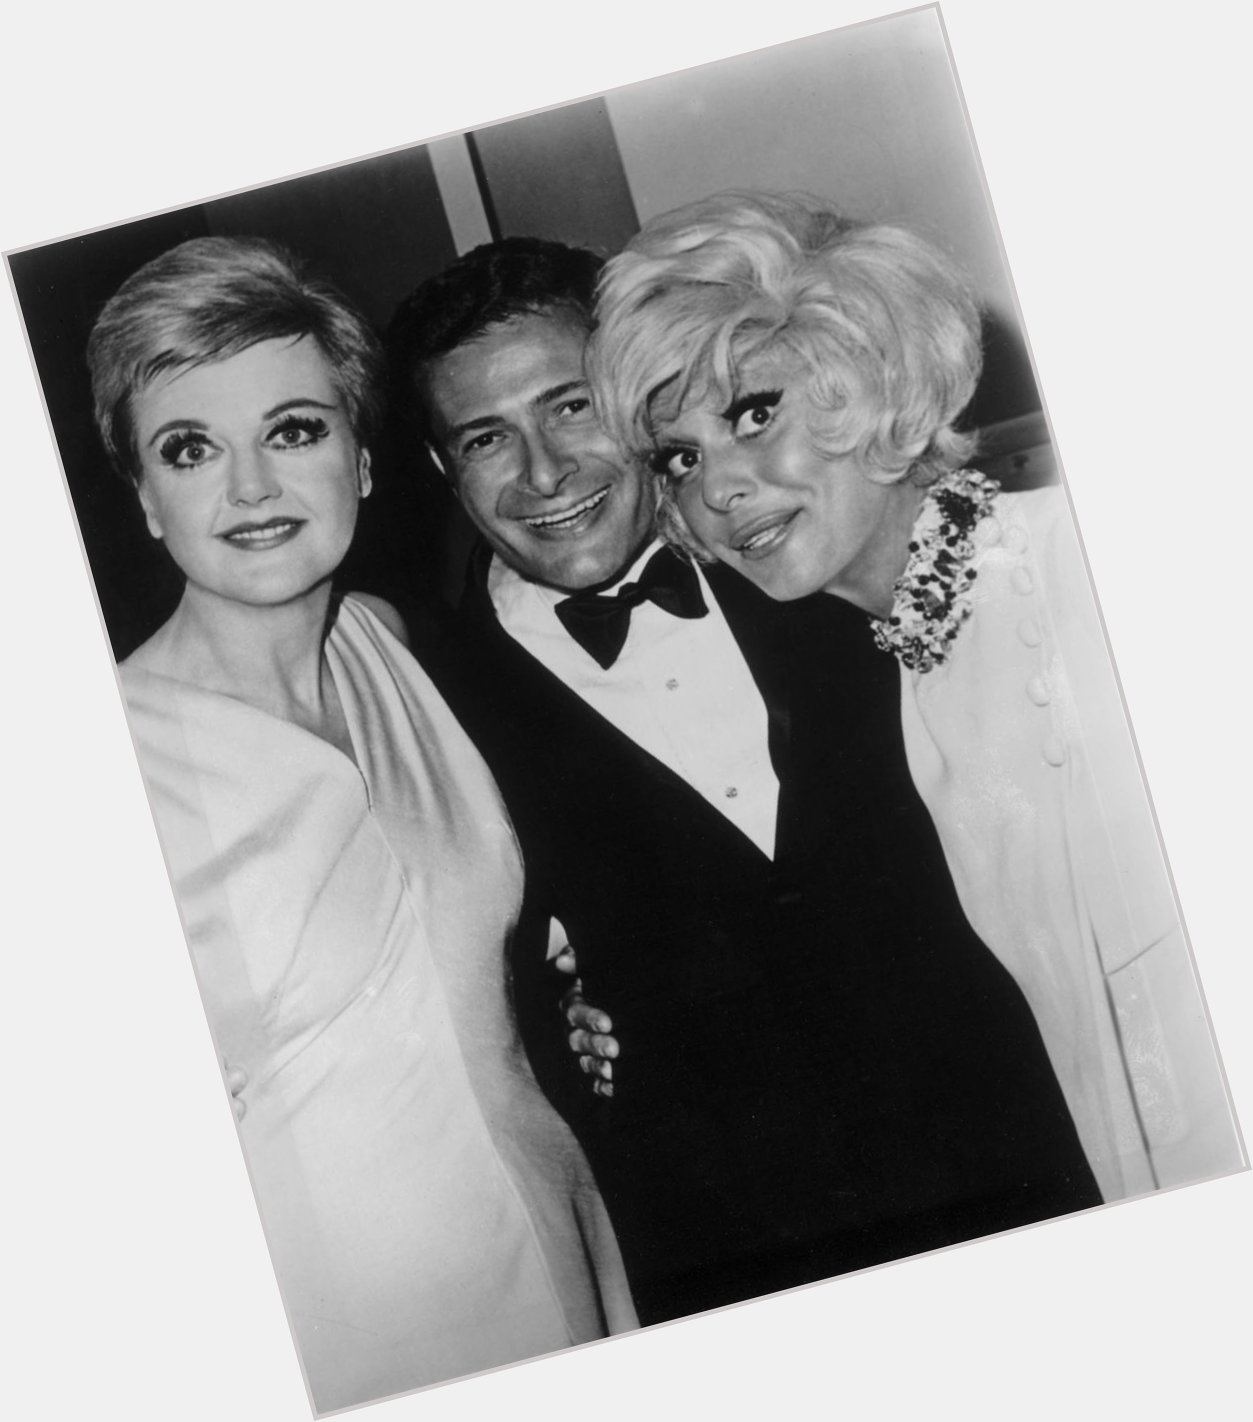 Happy 84th Birthday to one of the greatest Broadway composers and lyricists, 2-time Tony Award-winner, Jerry Herman! 